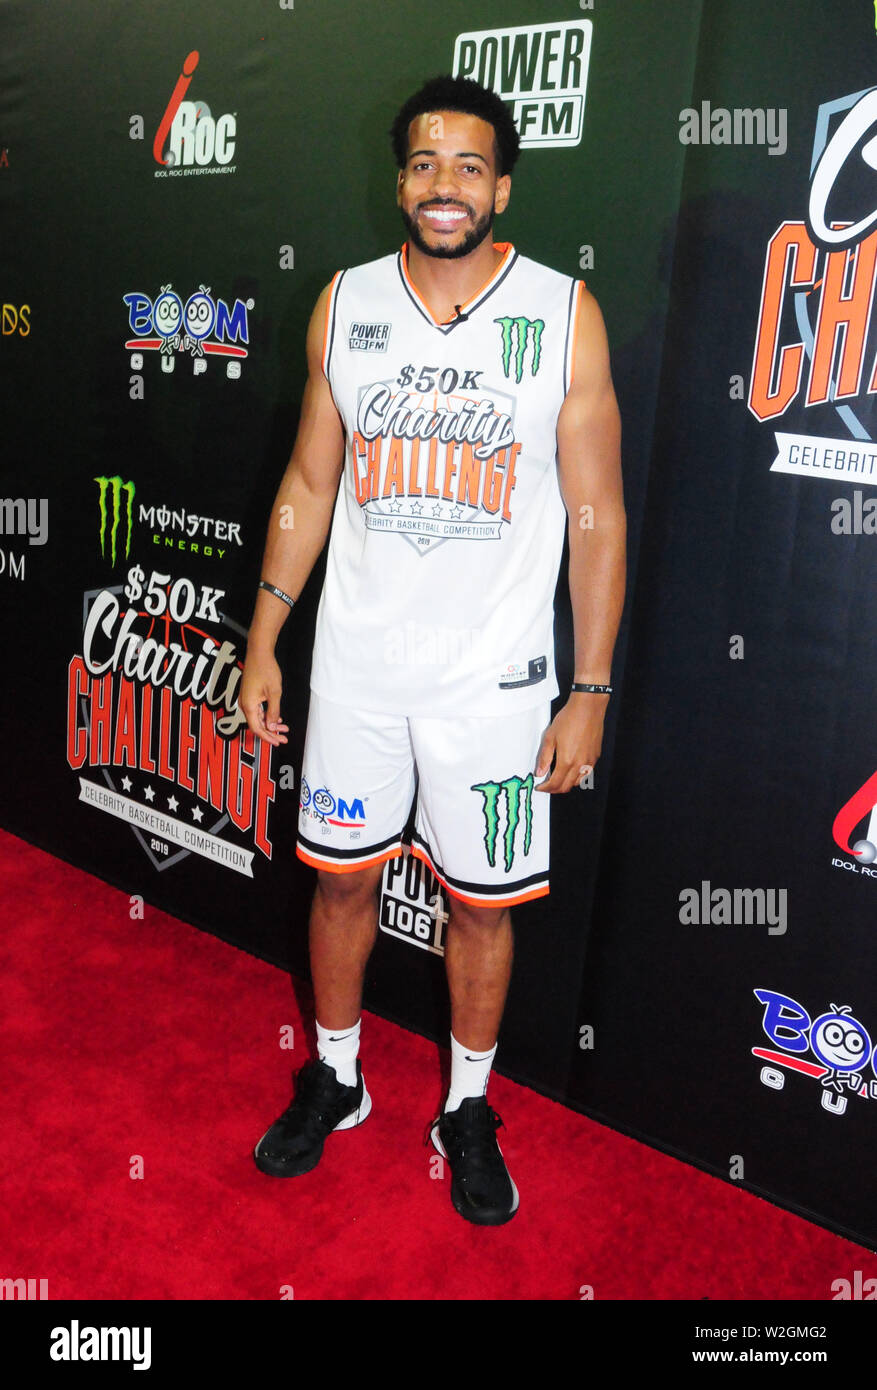 Los Angeles, California, USA 8th July 2019 Reality Television personality Eric Bigger attends the 2nd Annual Monster Energy $50K Charity Challenge Celebrity Basketball Game on July 8, 2019 at UCLA Pauley Pavilion in Los Angeles, California, USA. Photo by Barry King/Alamy Live News Stock Photo